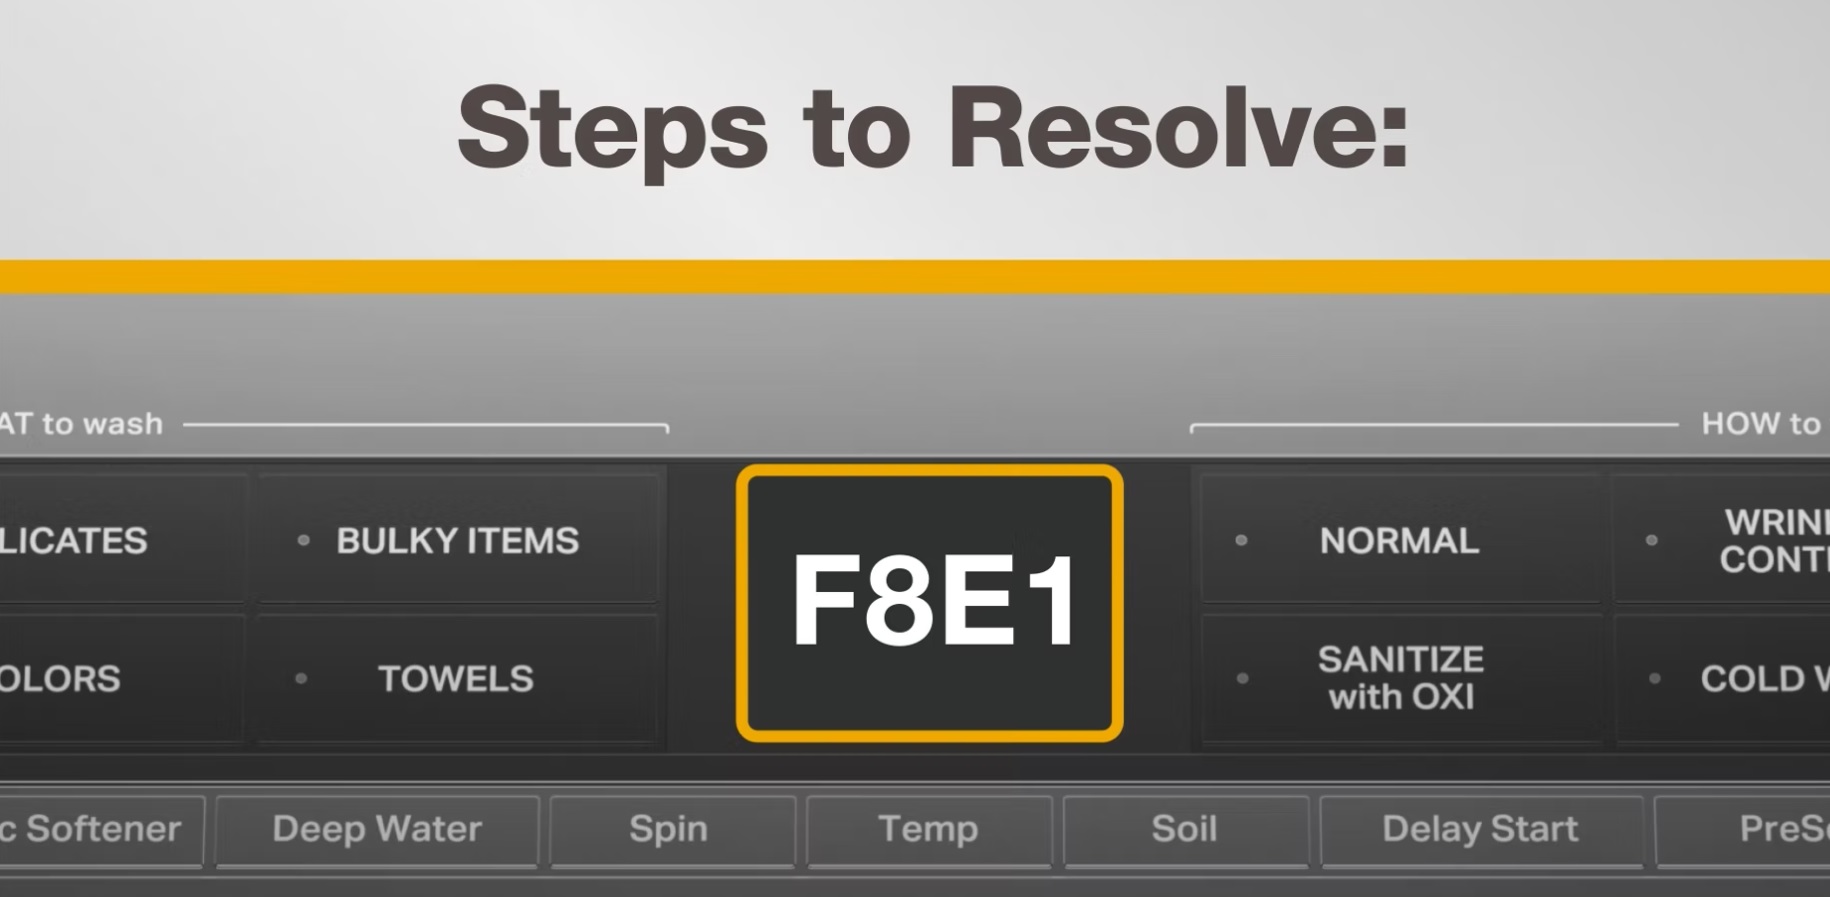 Follow these simple steps to resolve Error Code F8E1 on your Whirlpool Brand® washer. This video will assist you if you are experiencing no water detected. If you need further assistance call for service at 1-866-333-4591.